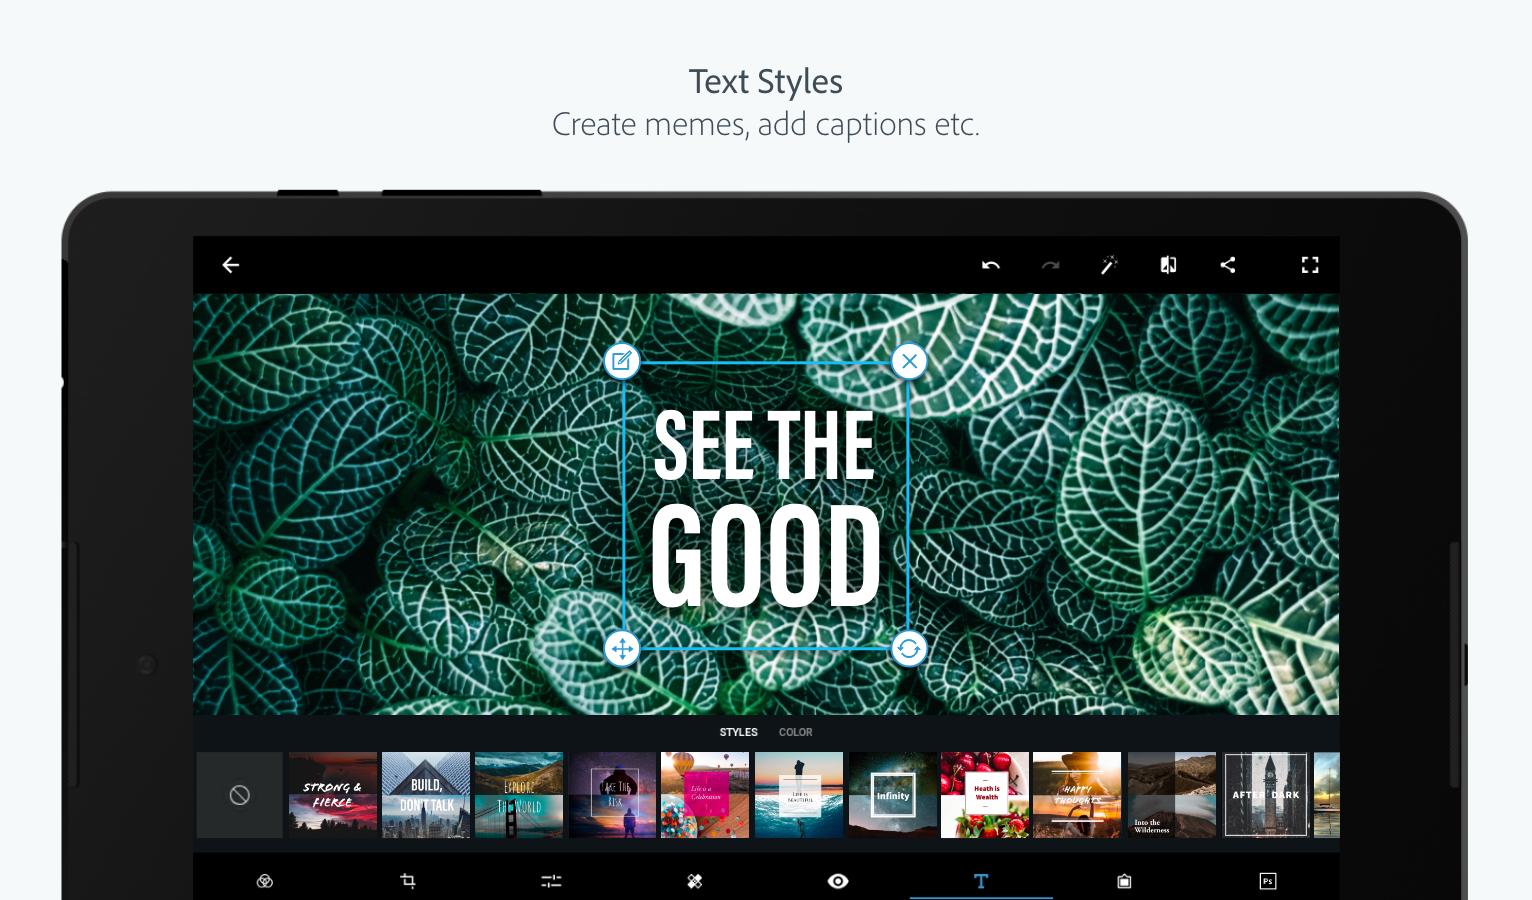 adobe photoshop express apk download for android